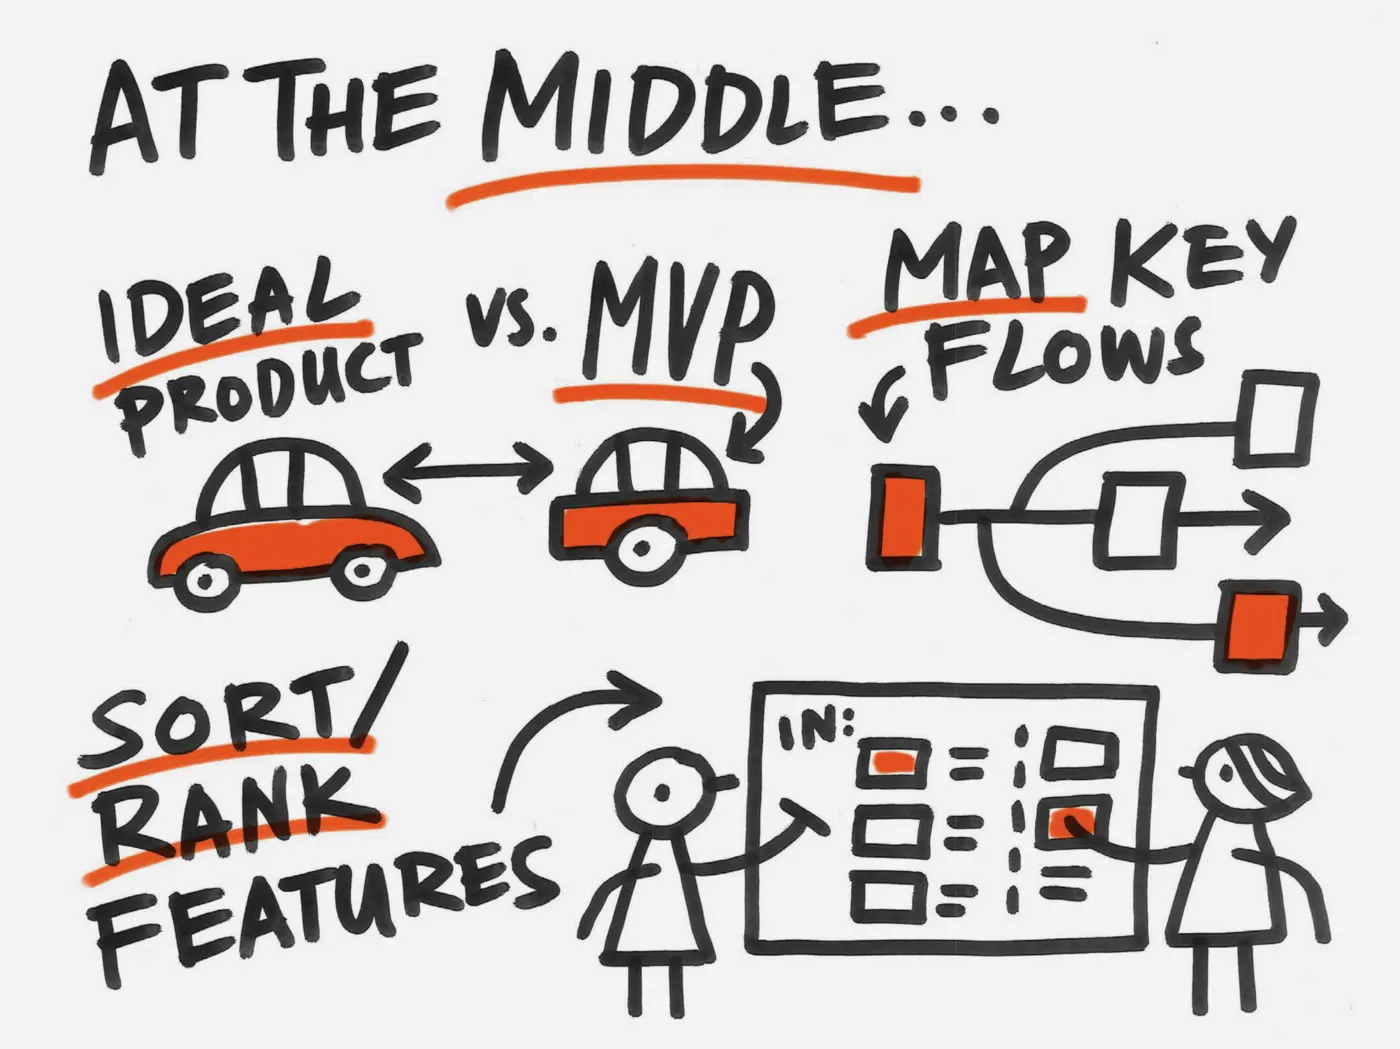 Black marker sketches alongside the words: "At the middle... Ideal product vs. MVP. Map key flows. Sort/rank features."